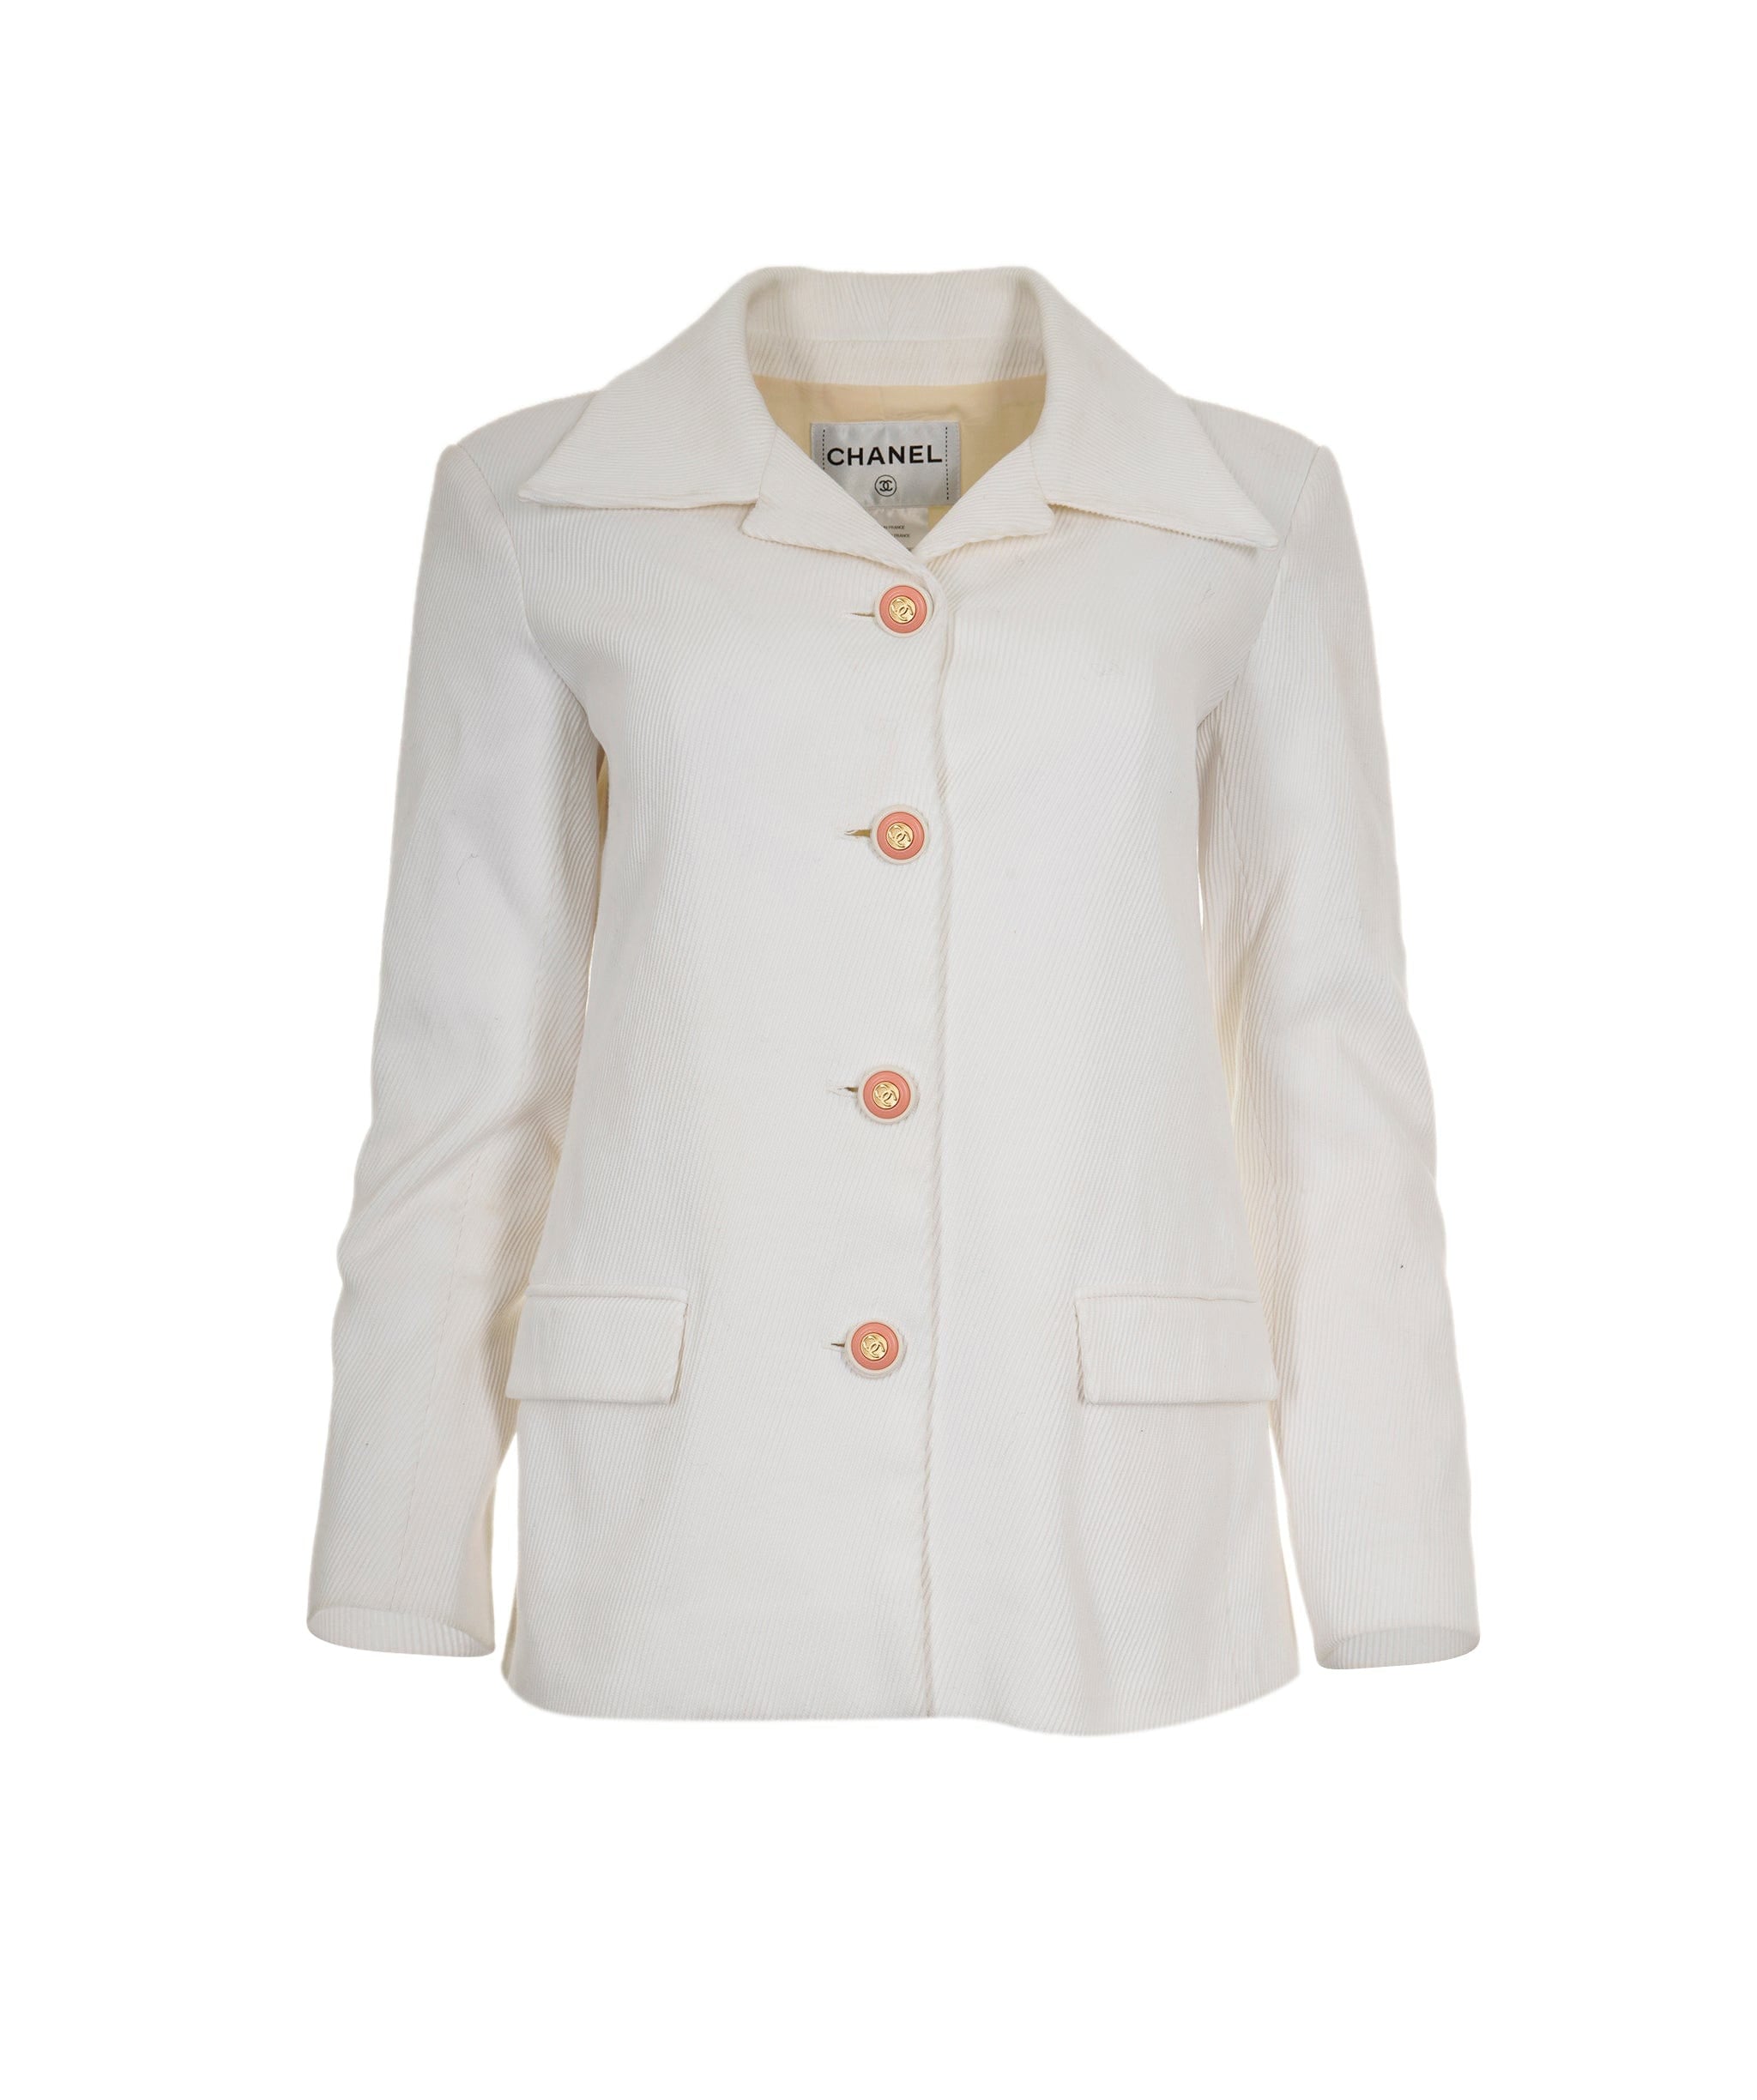 Chanel jacket white with pink and gold cc buttons AVC1308